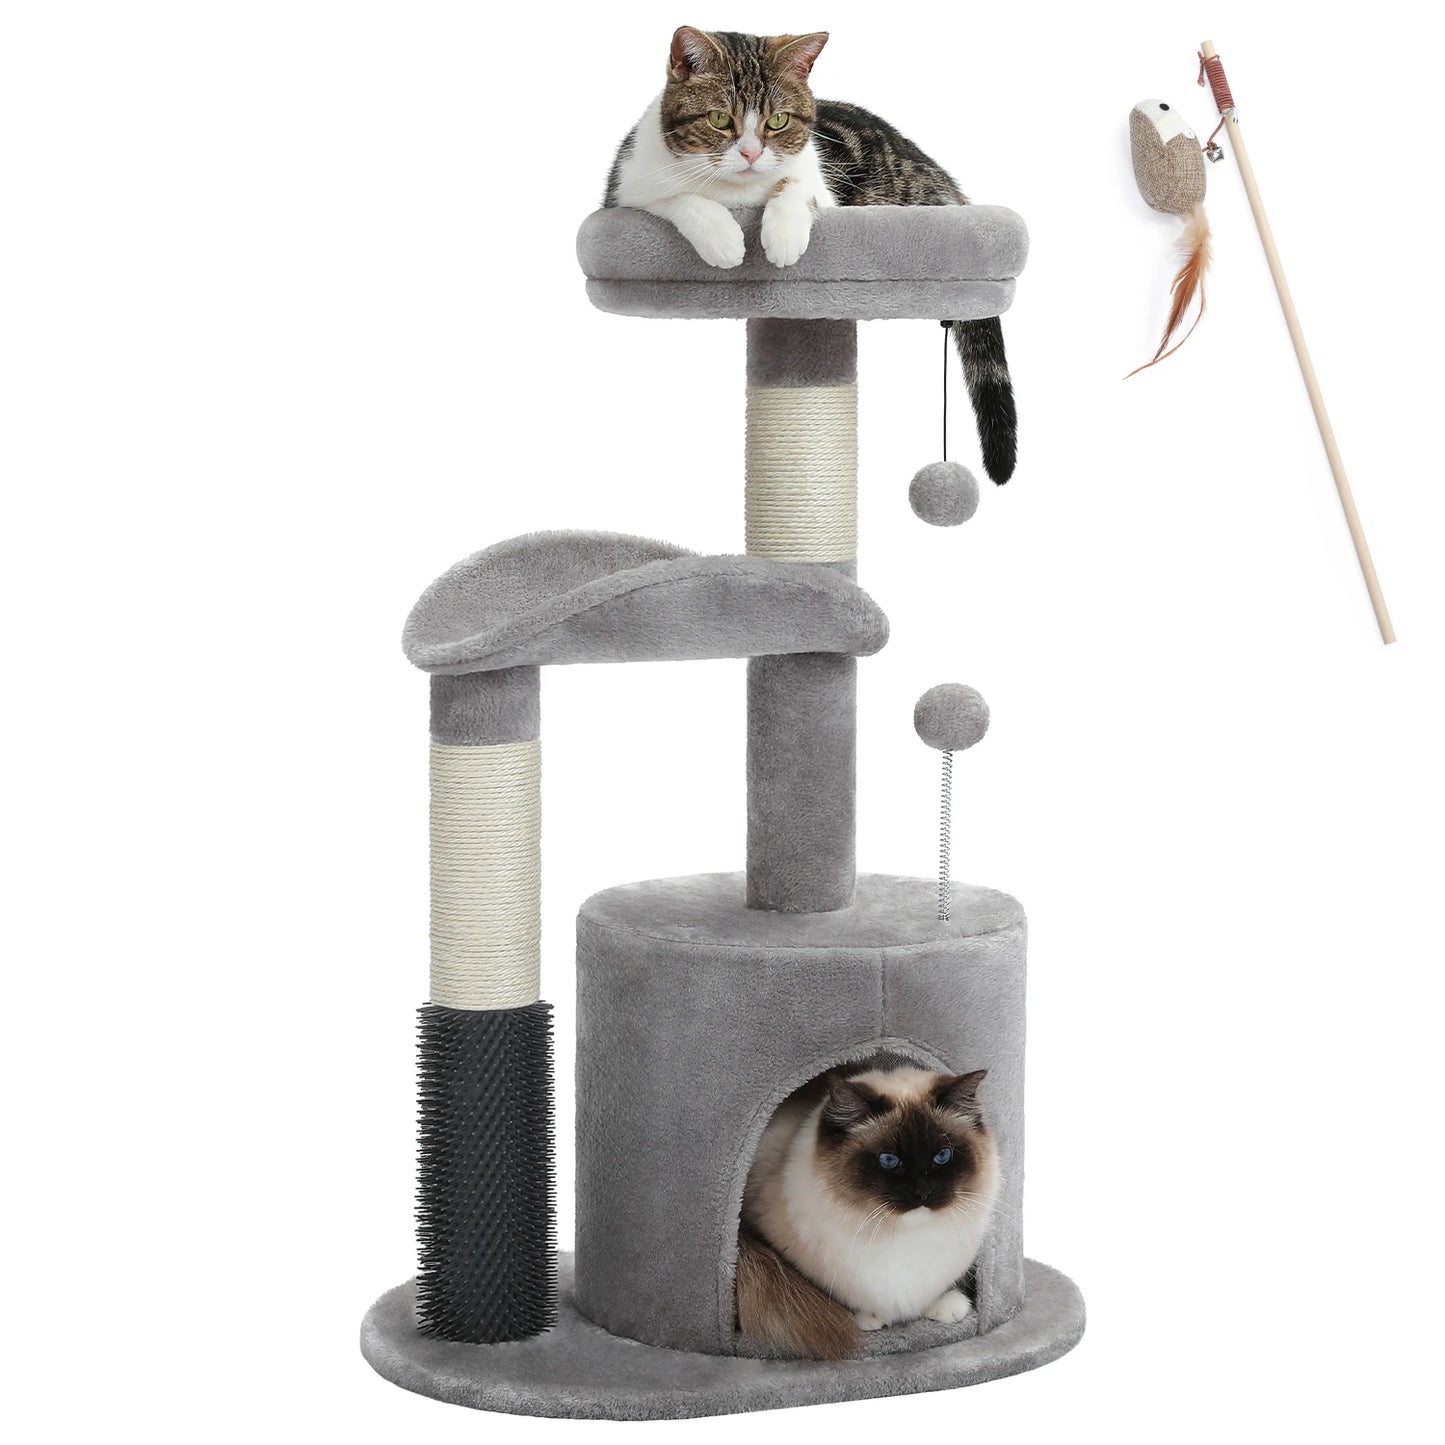 83cm Charming Cat Tree with Cozy Condo and Interactive Features